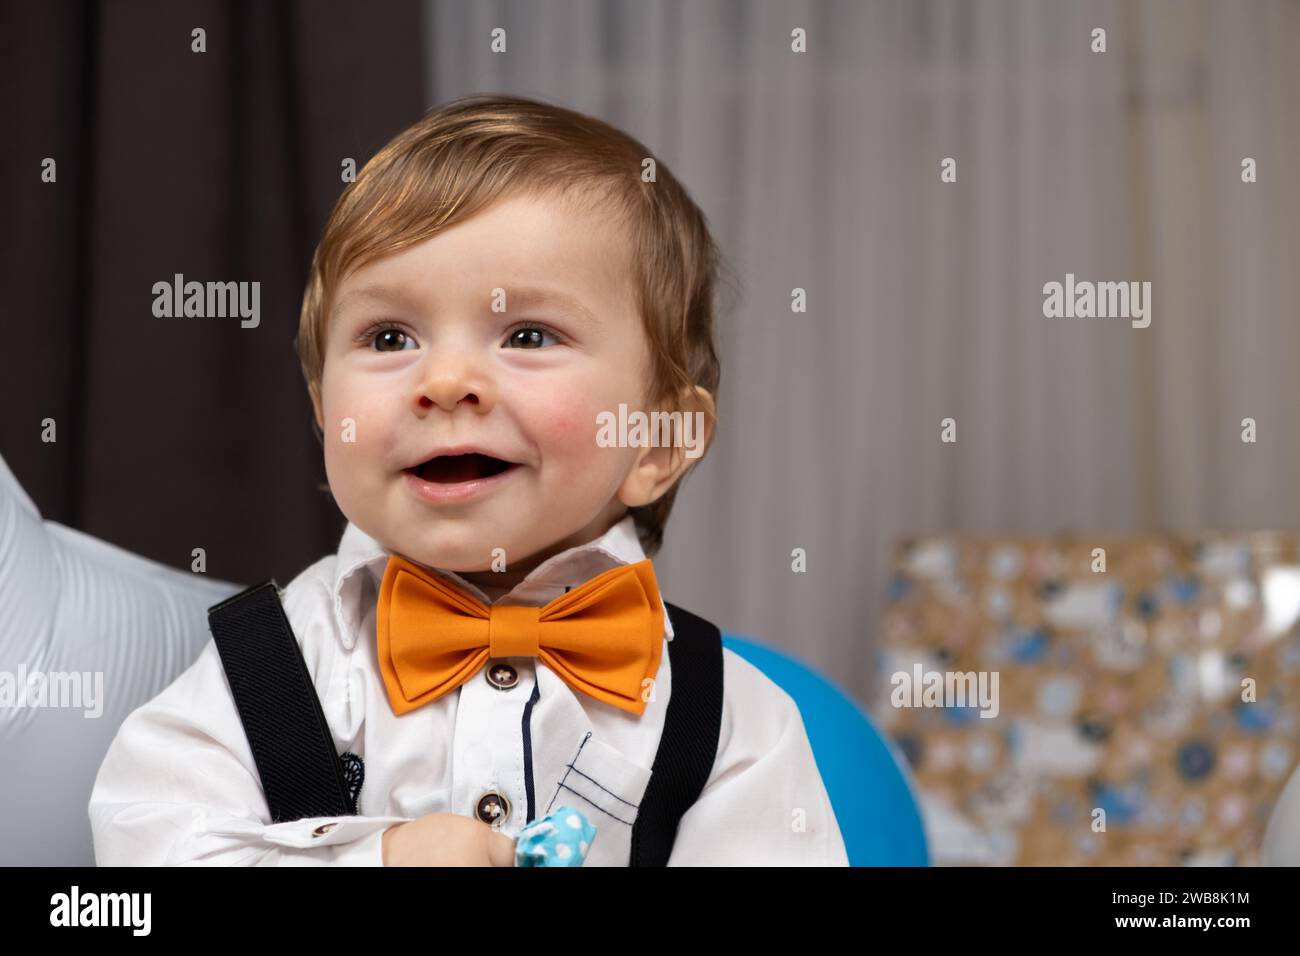 Sincere emotions of happy 11 month old red-haired baby, close-up portrait. Stock Photo